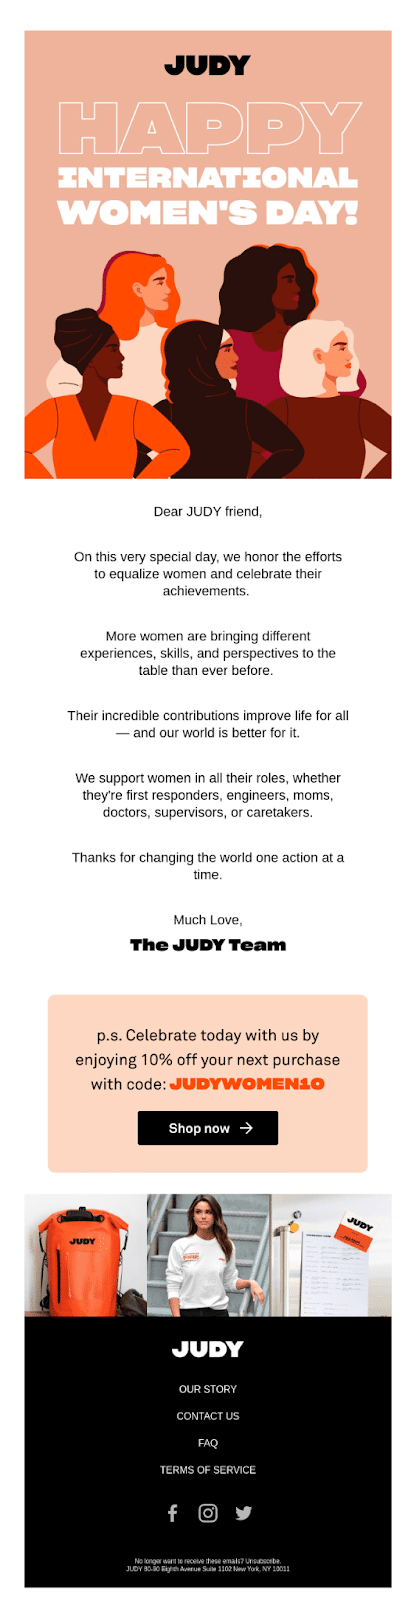 An example of an email for International Women's day from Judy